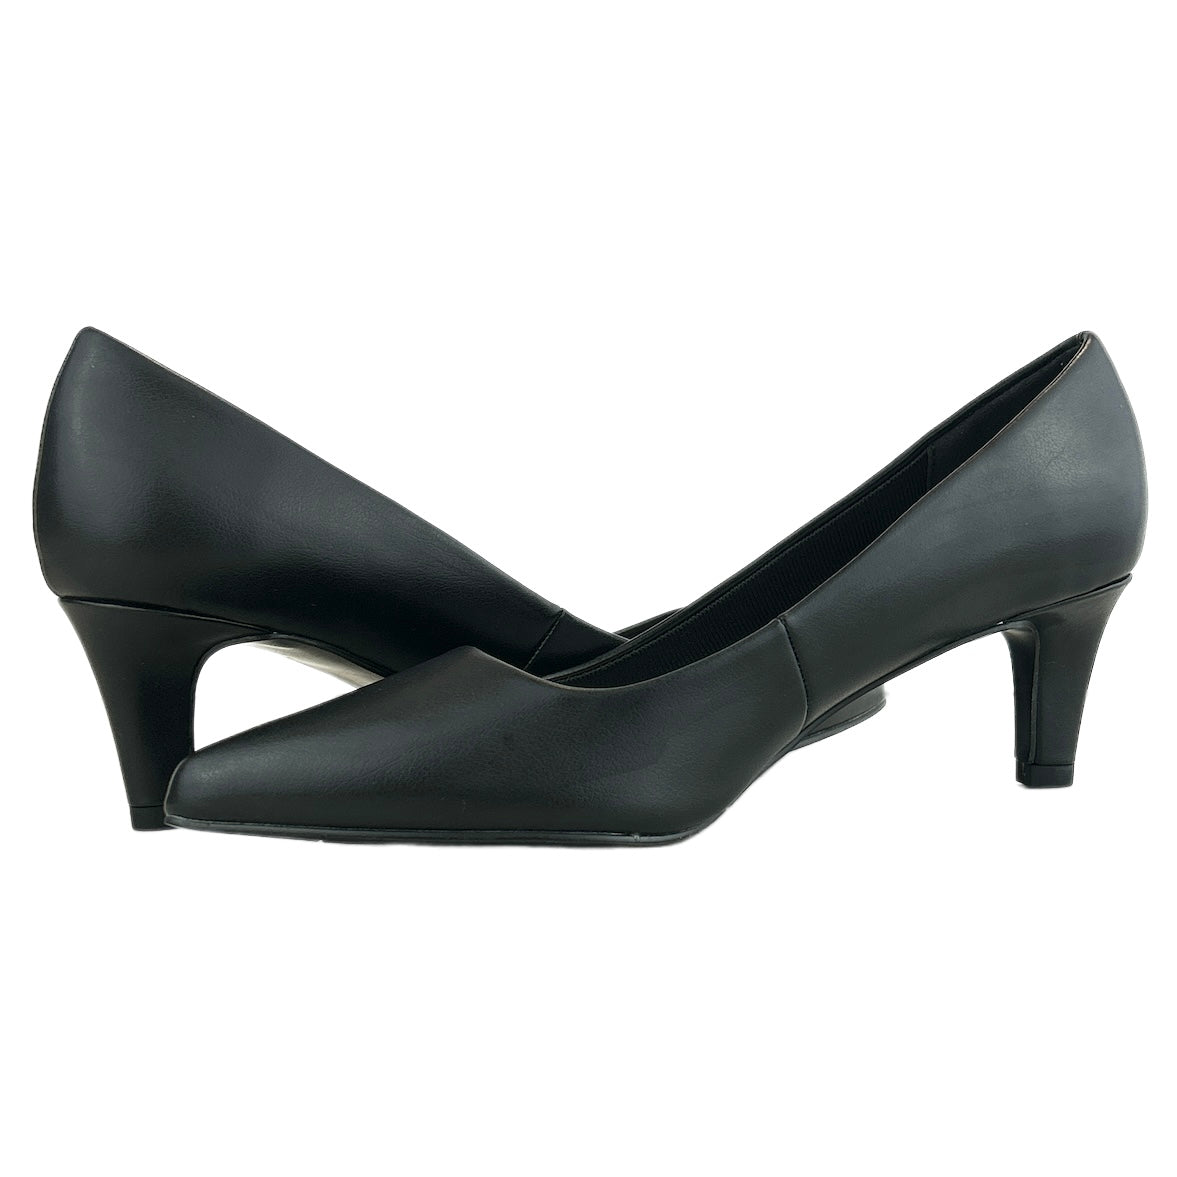 POINTE Black Pointed Toe Slip On Size 6.5 Women's Pumps Shoes